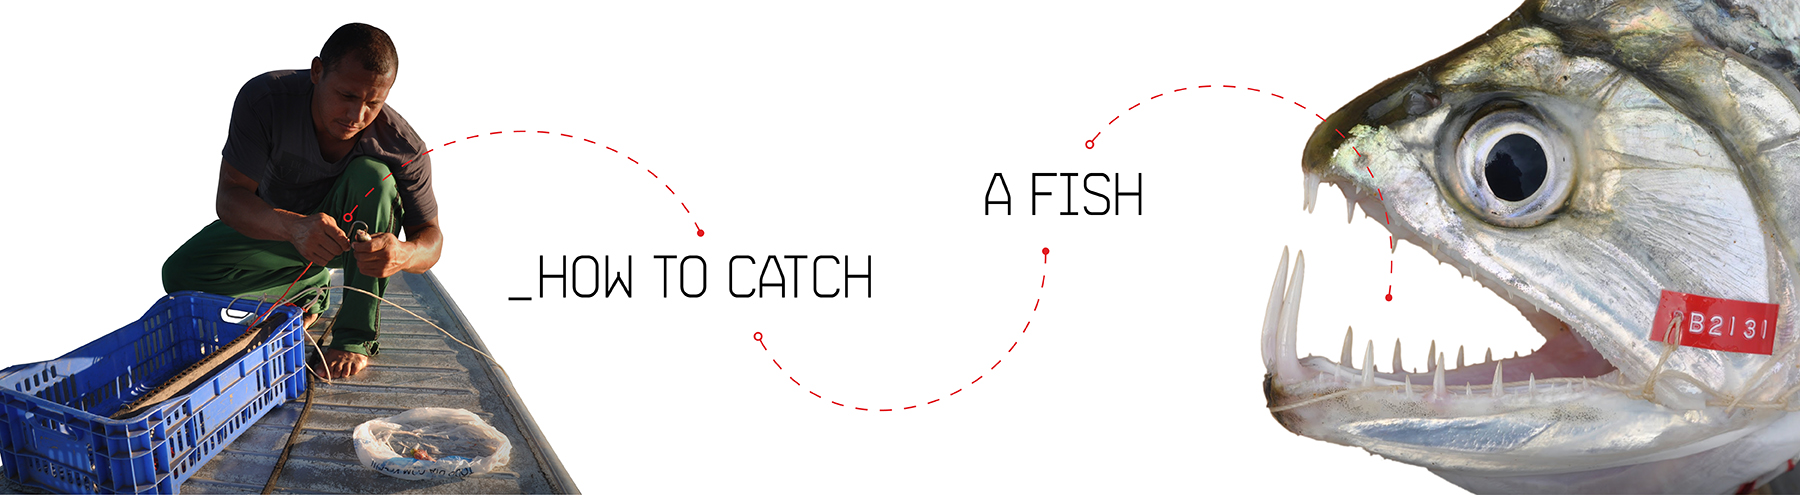 How to Catch a Fish